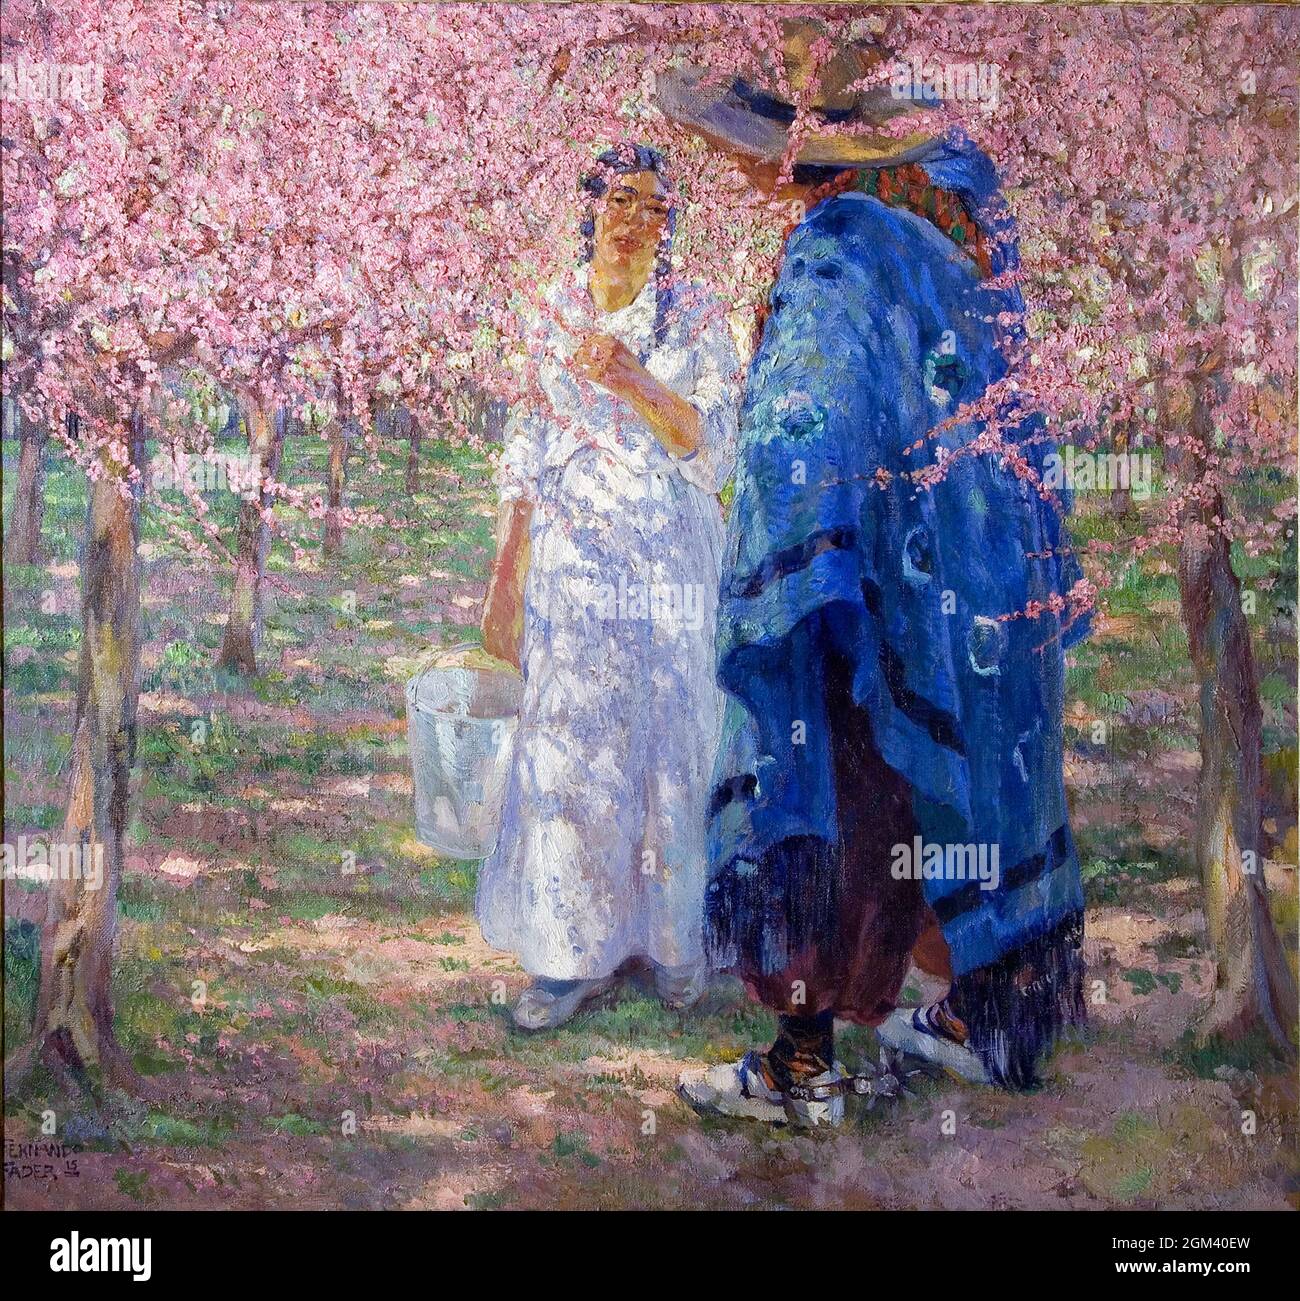 Amid Peachtrees in Bloom by Fernando Fader (1882-1935), 1915 Stock Photo